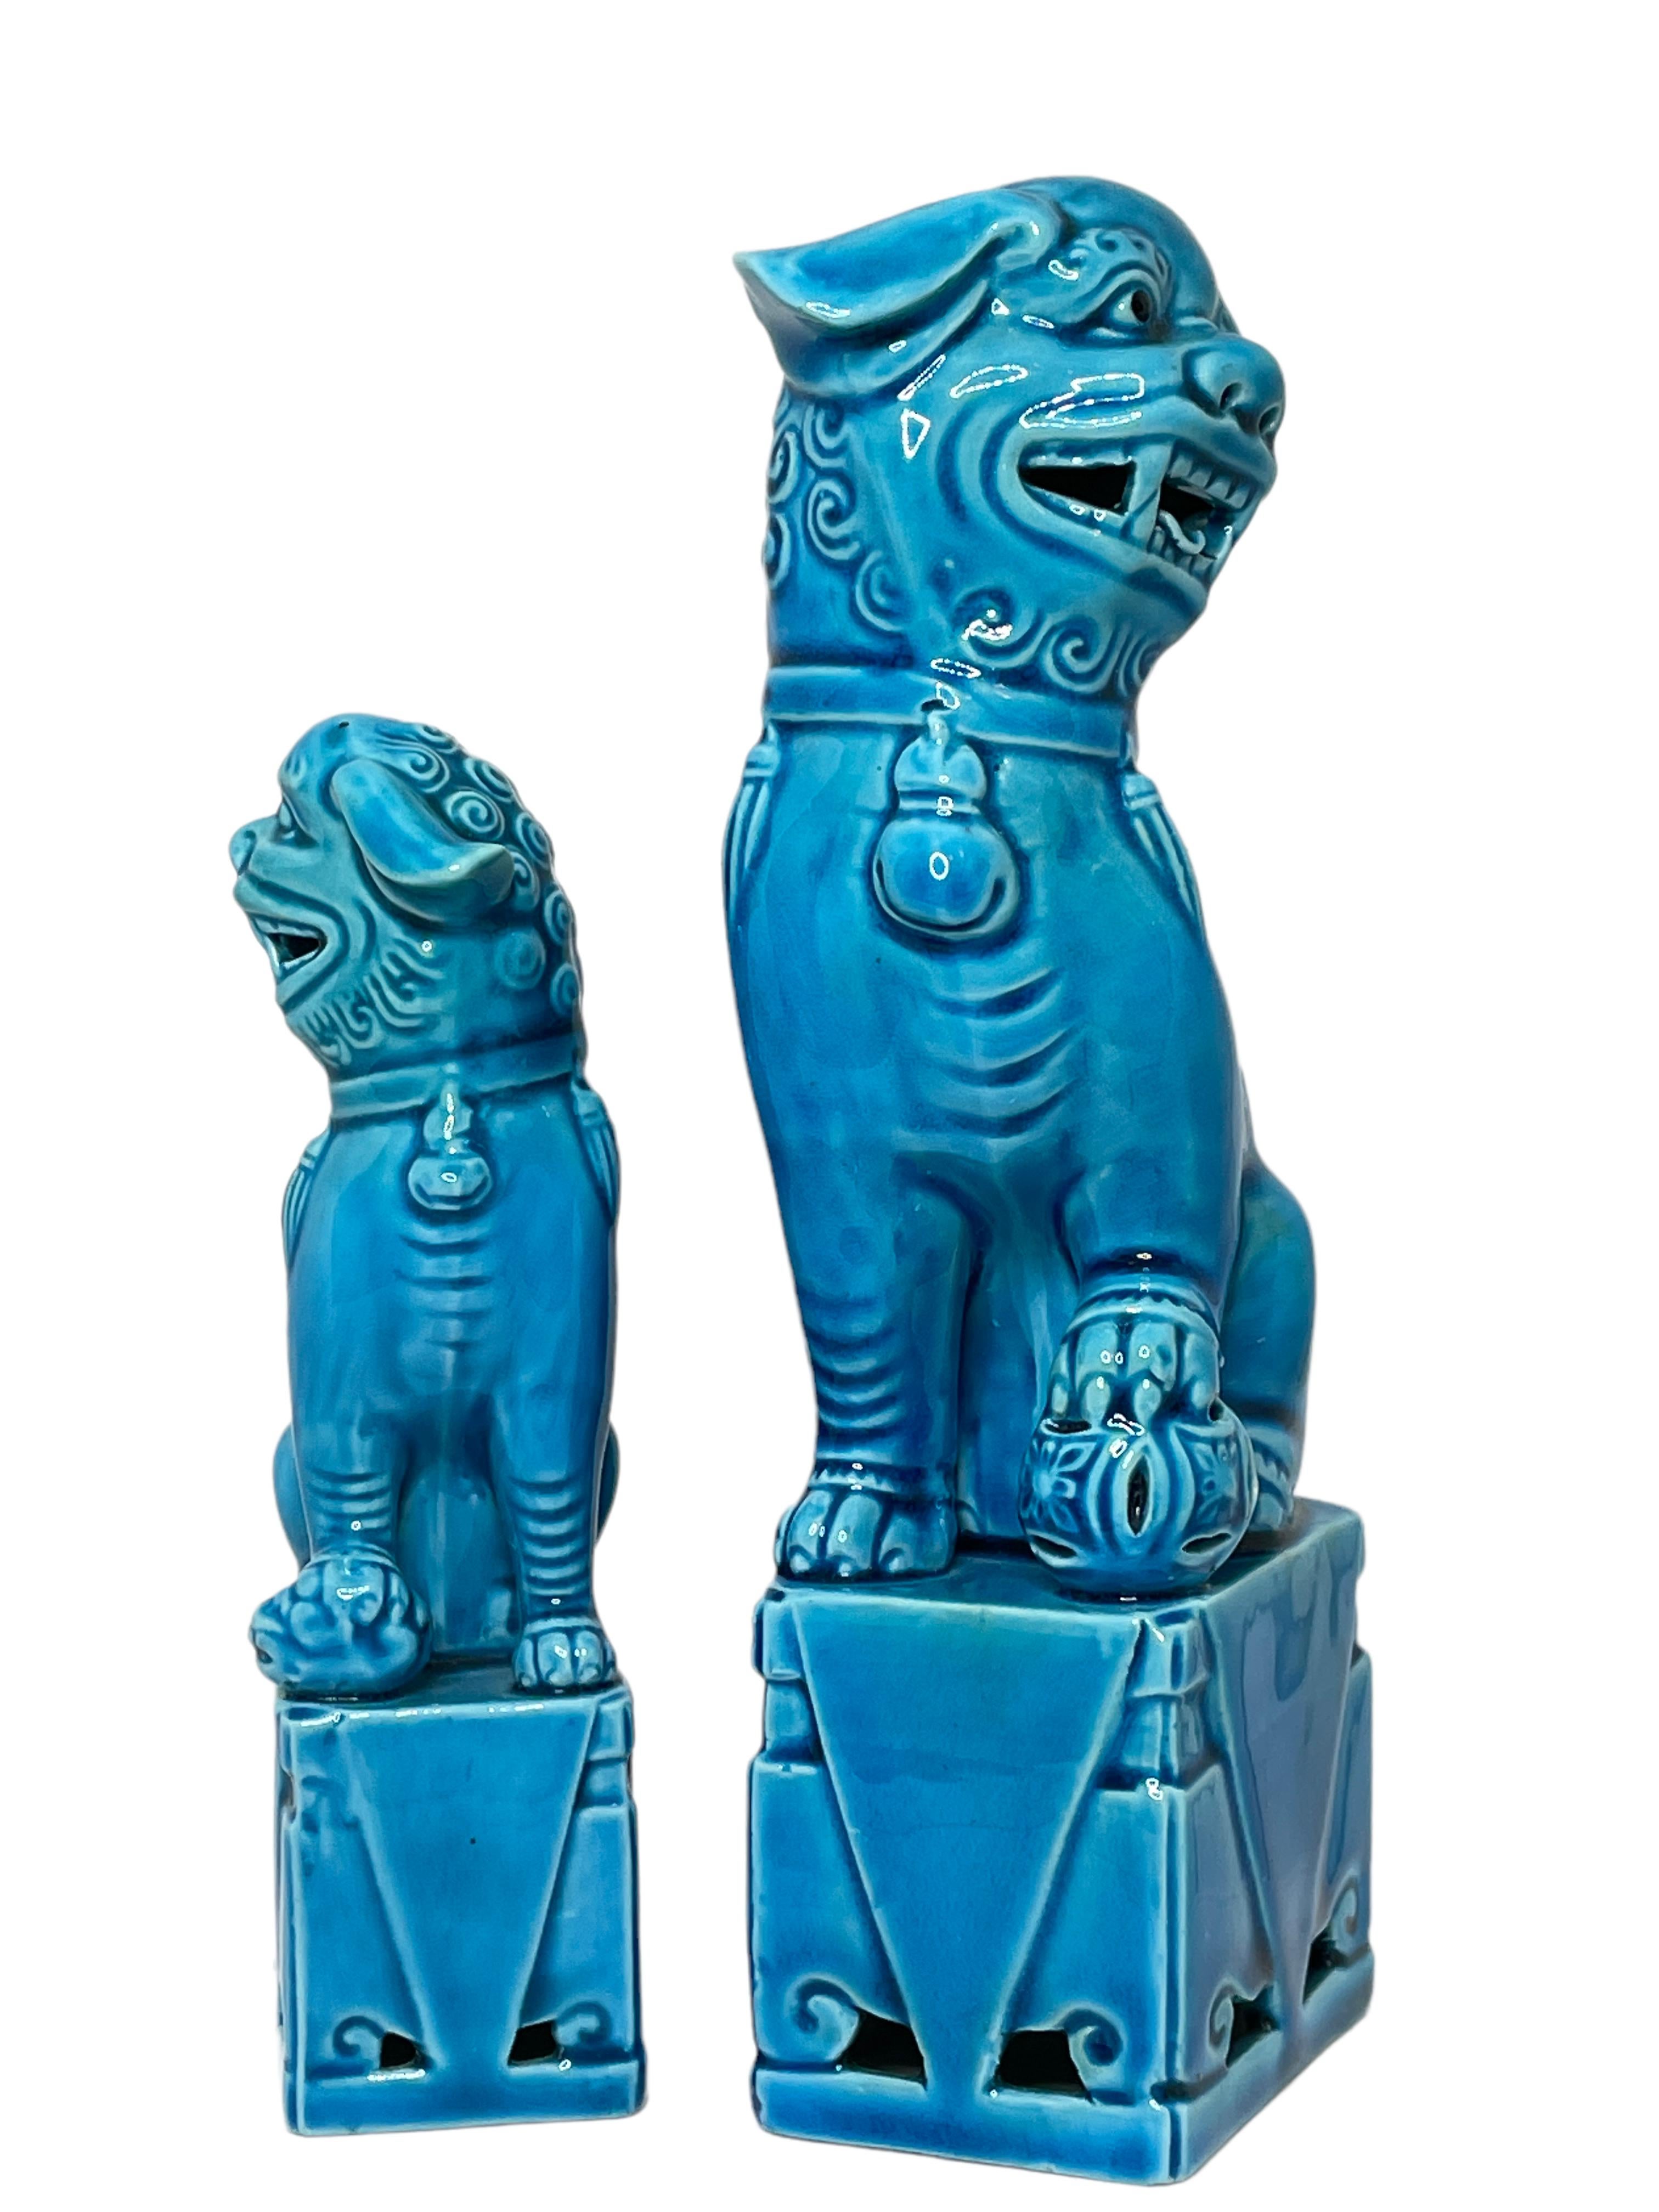 A very nice pair of vintage, turquoise blue, ceramic foo dogs, circa 1980s. Excellent condition and patina; makes a fun decor item in any room! Size given in measurements section refers to the largest item. The smaller one is approx. 4 5/8